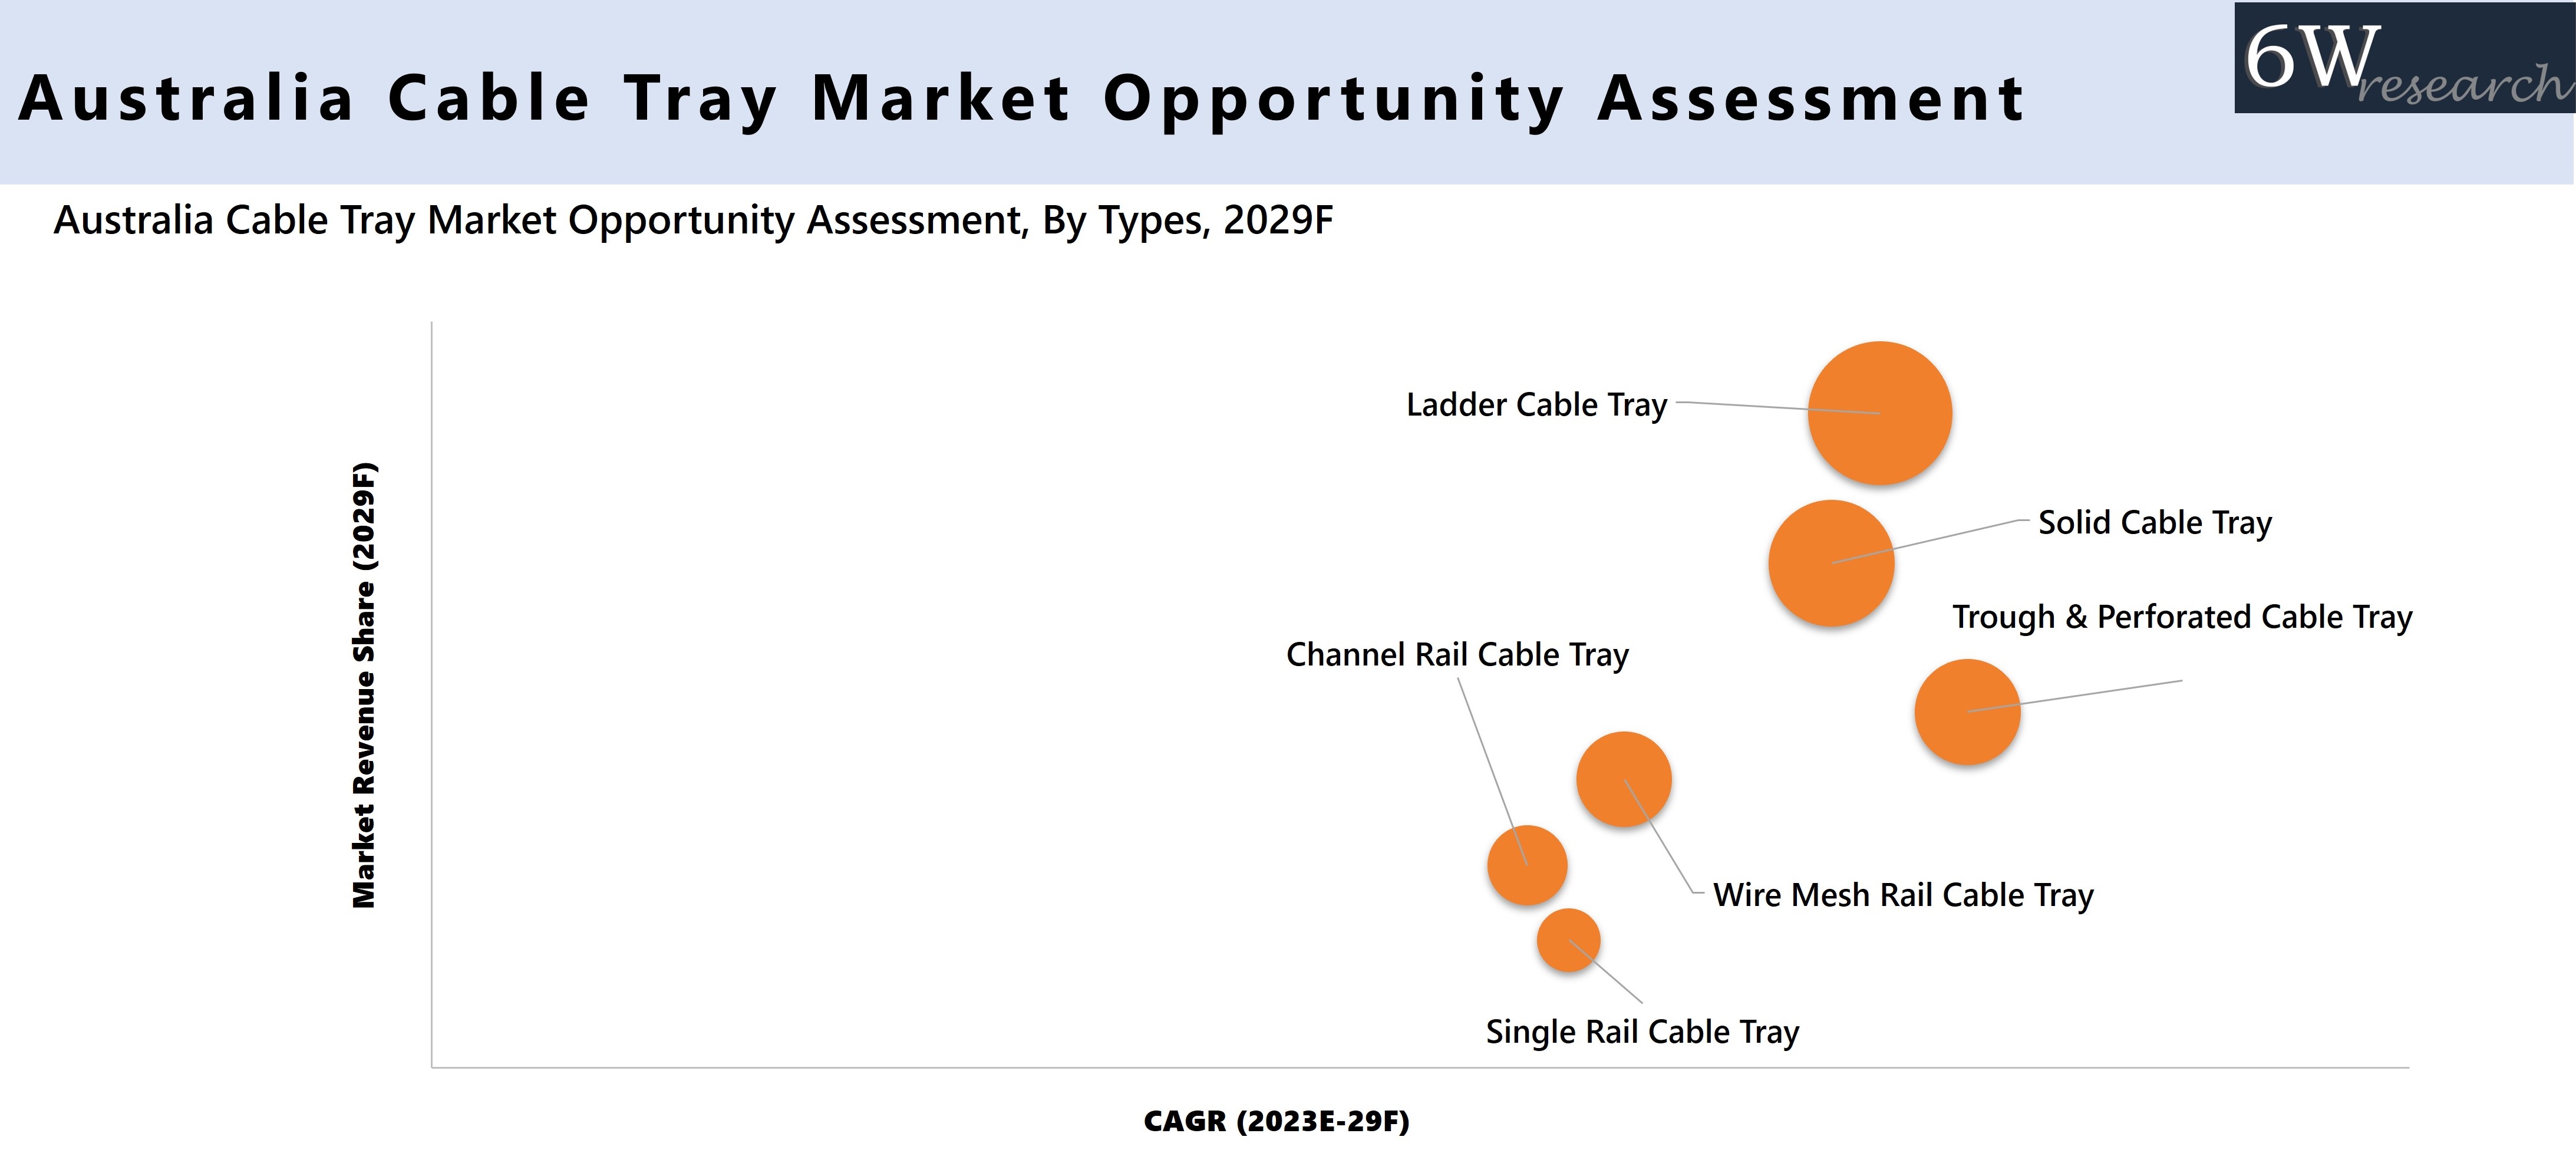 Australia Cable Tray Market Opportunity Assessment